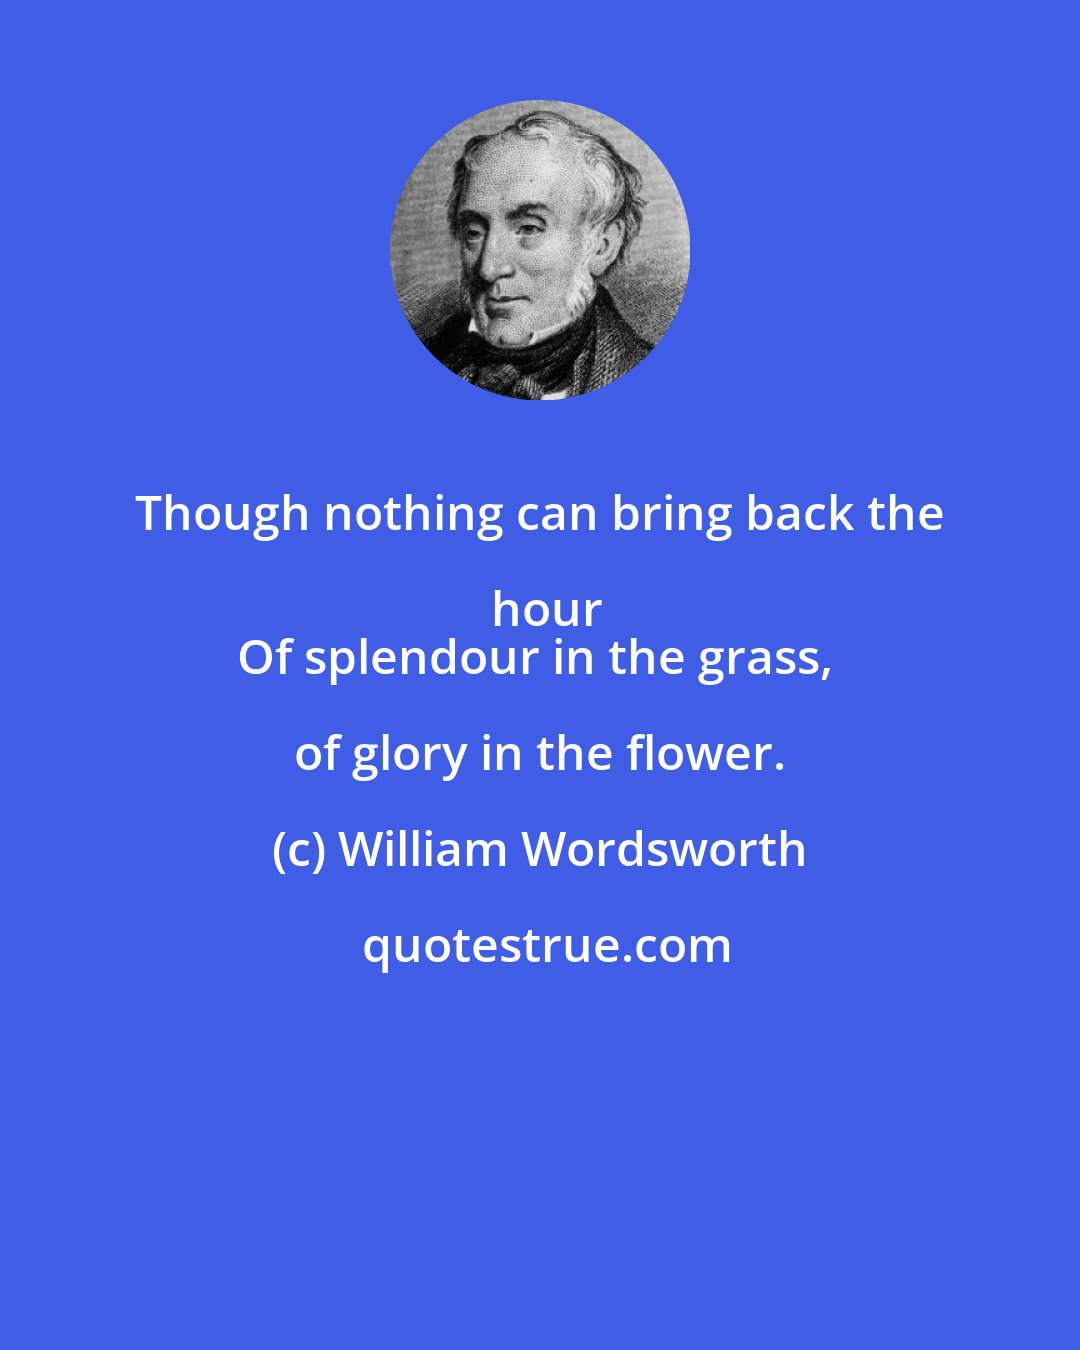 William Wordsworth: Though nothing can bring back the hour
Of splendour in the grass, of glory in the flower.